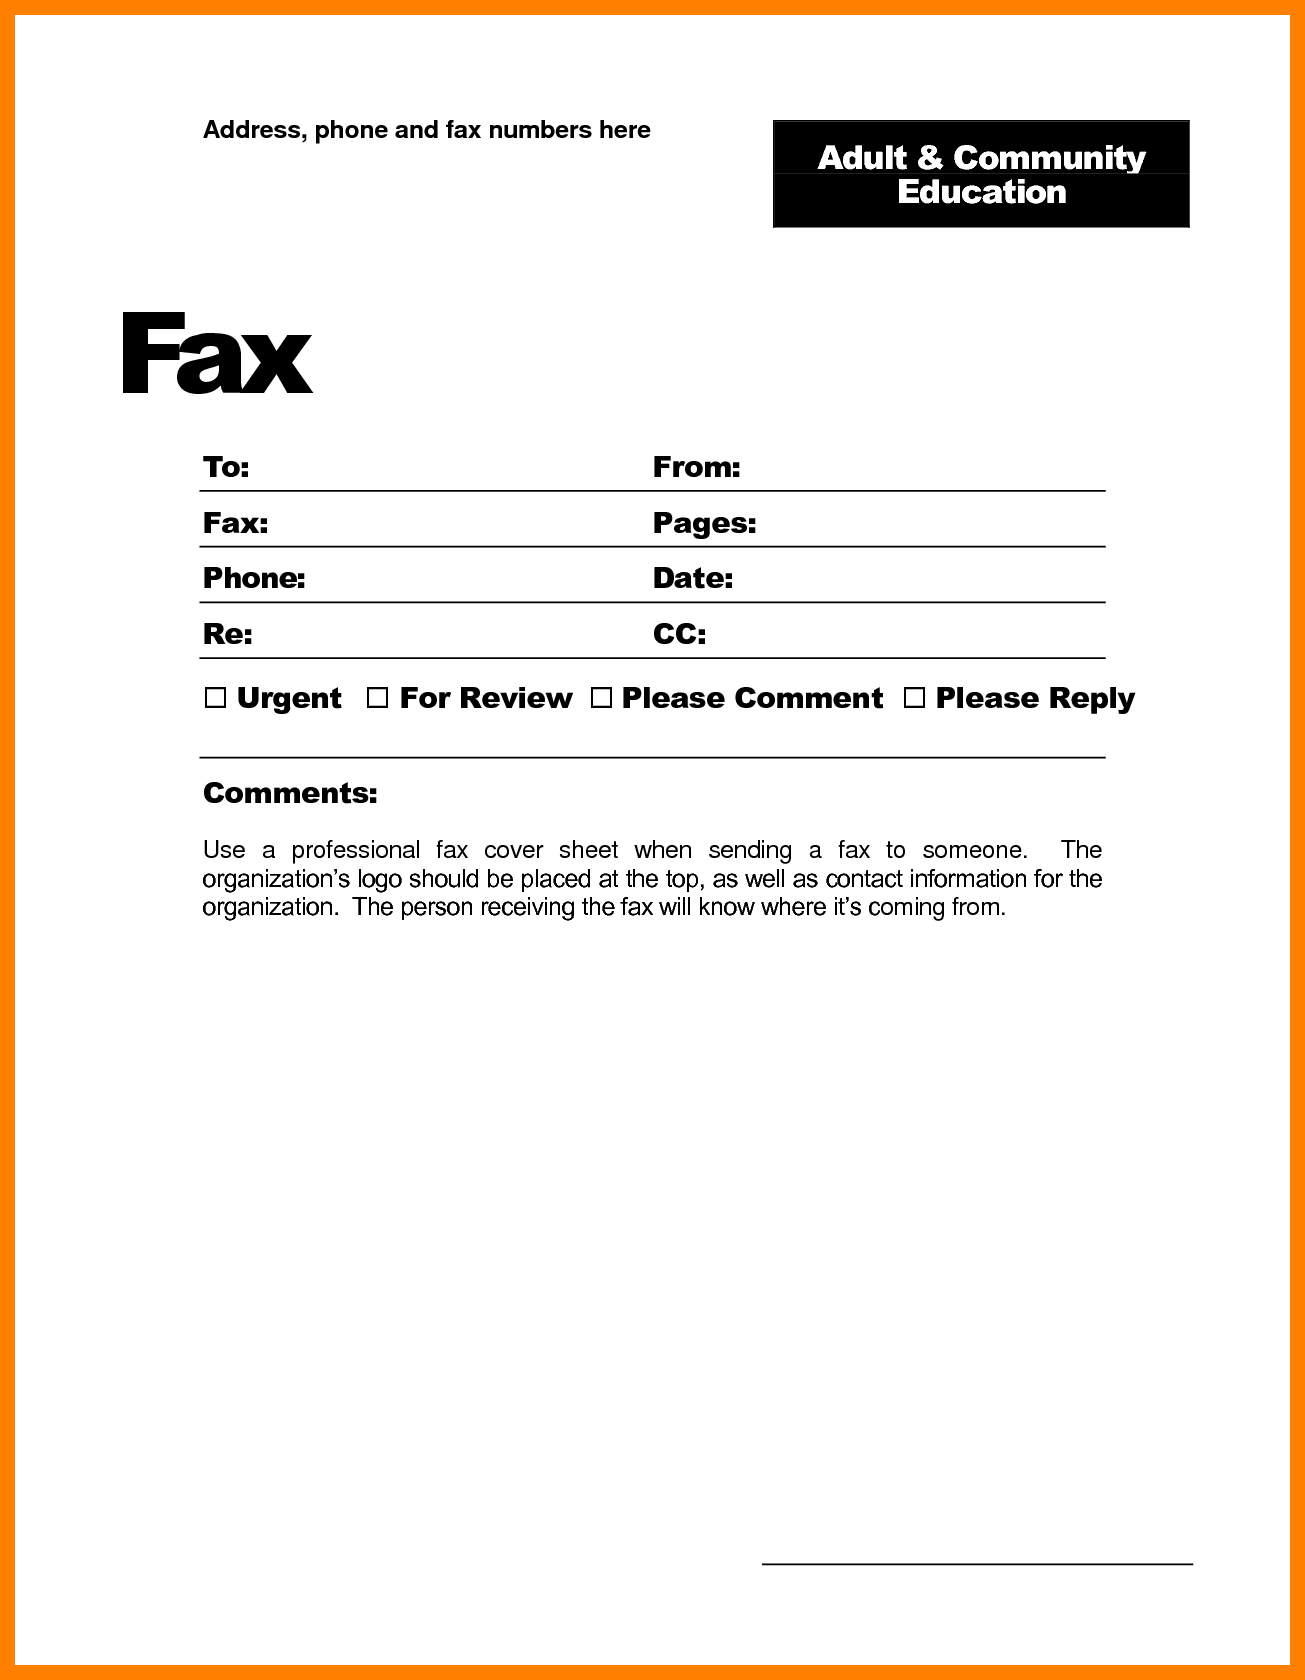 Fax Cover Sheet | Download Free Fax Cover Sheet. Professional/ Personal